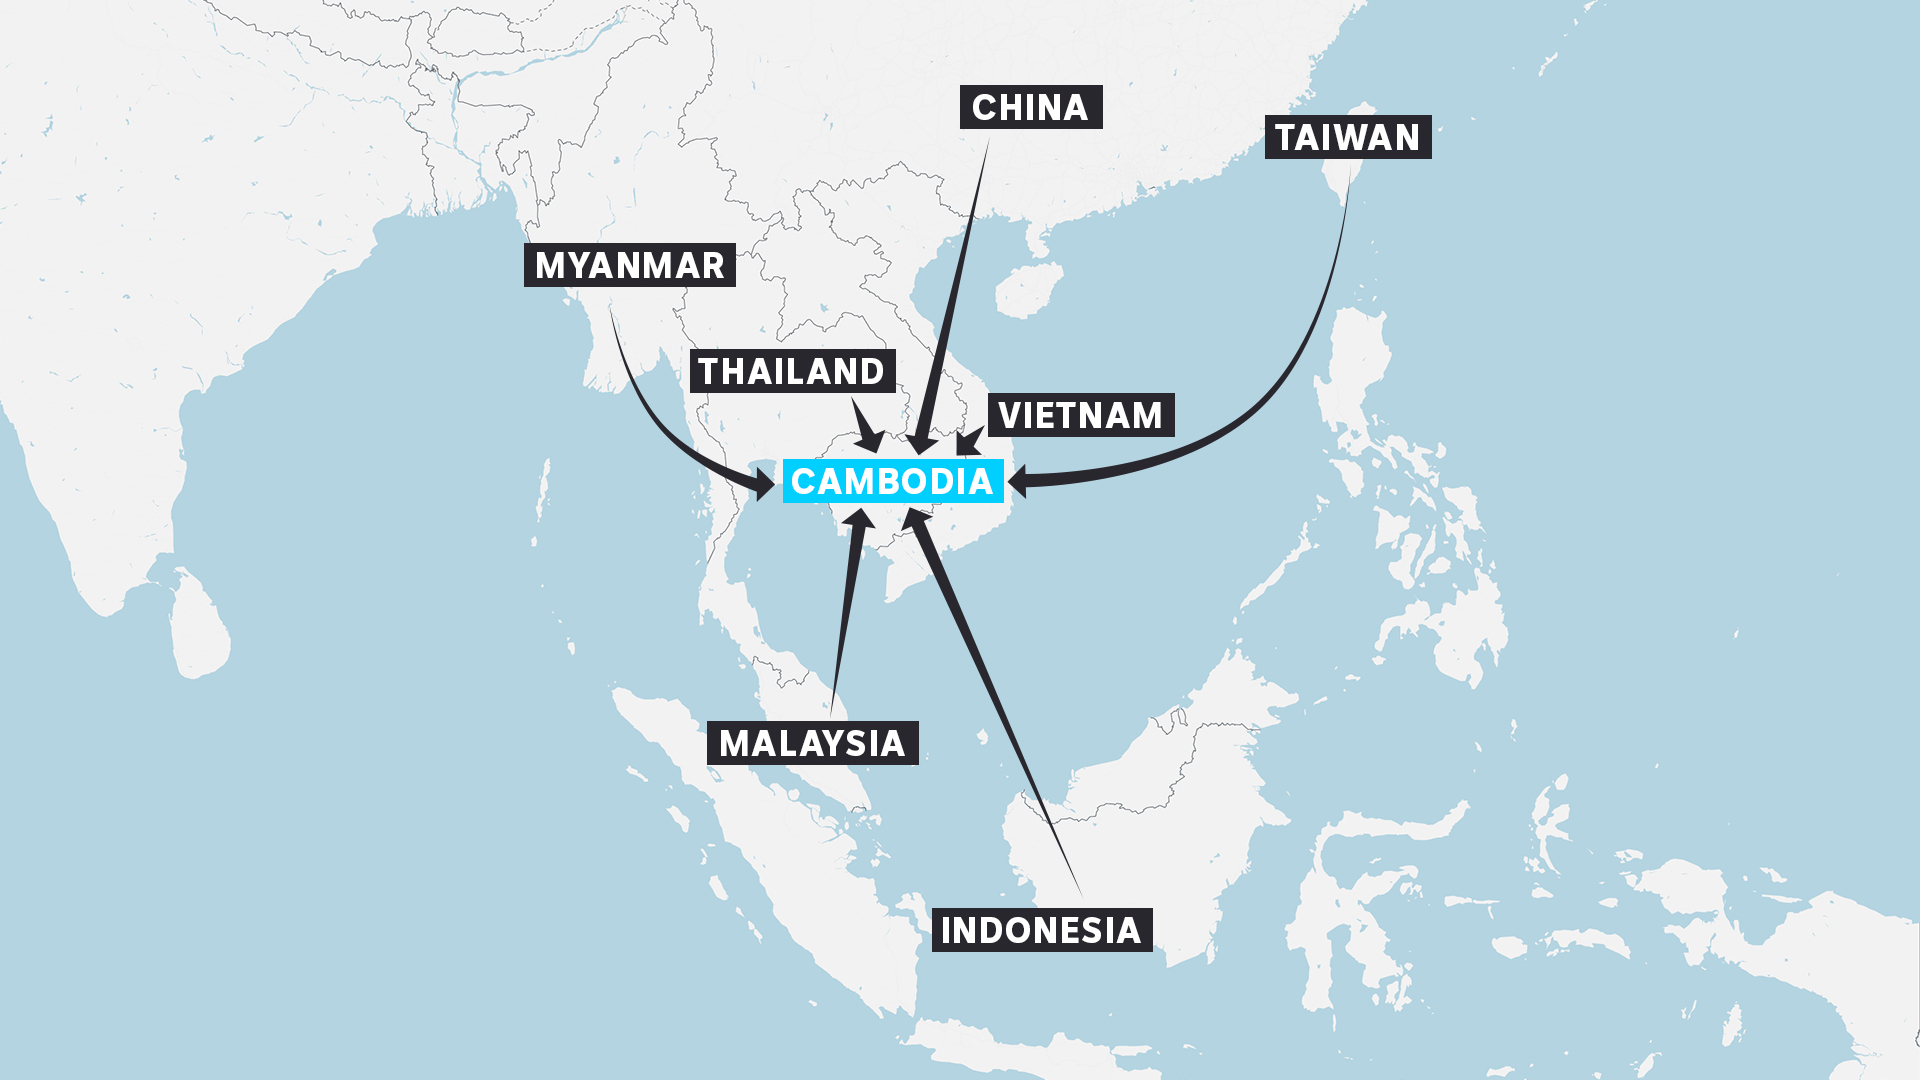 A map of South-East Asia showing directional flows